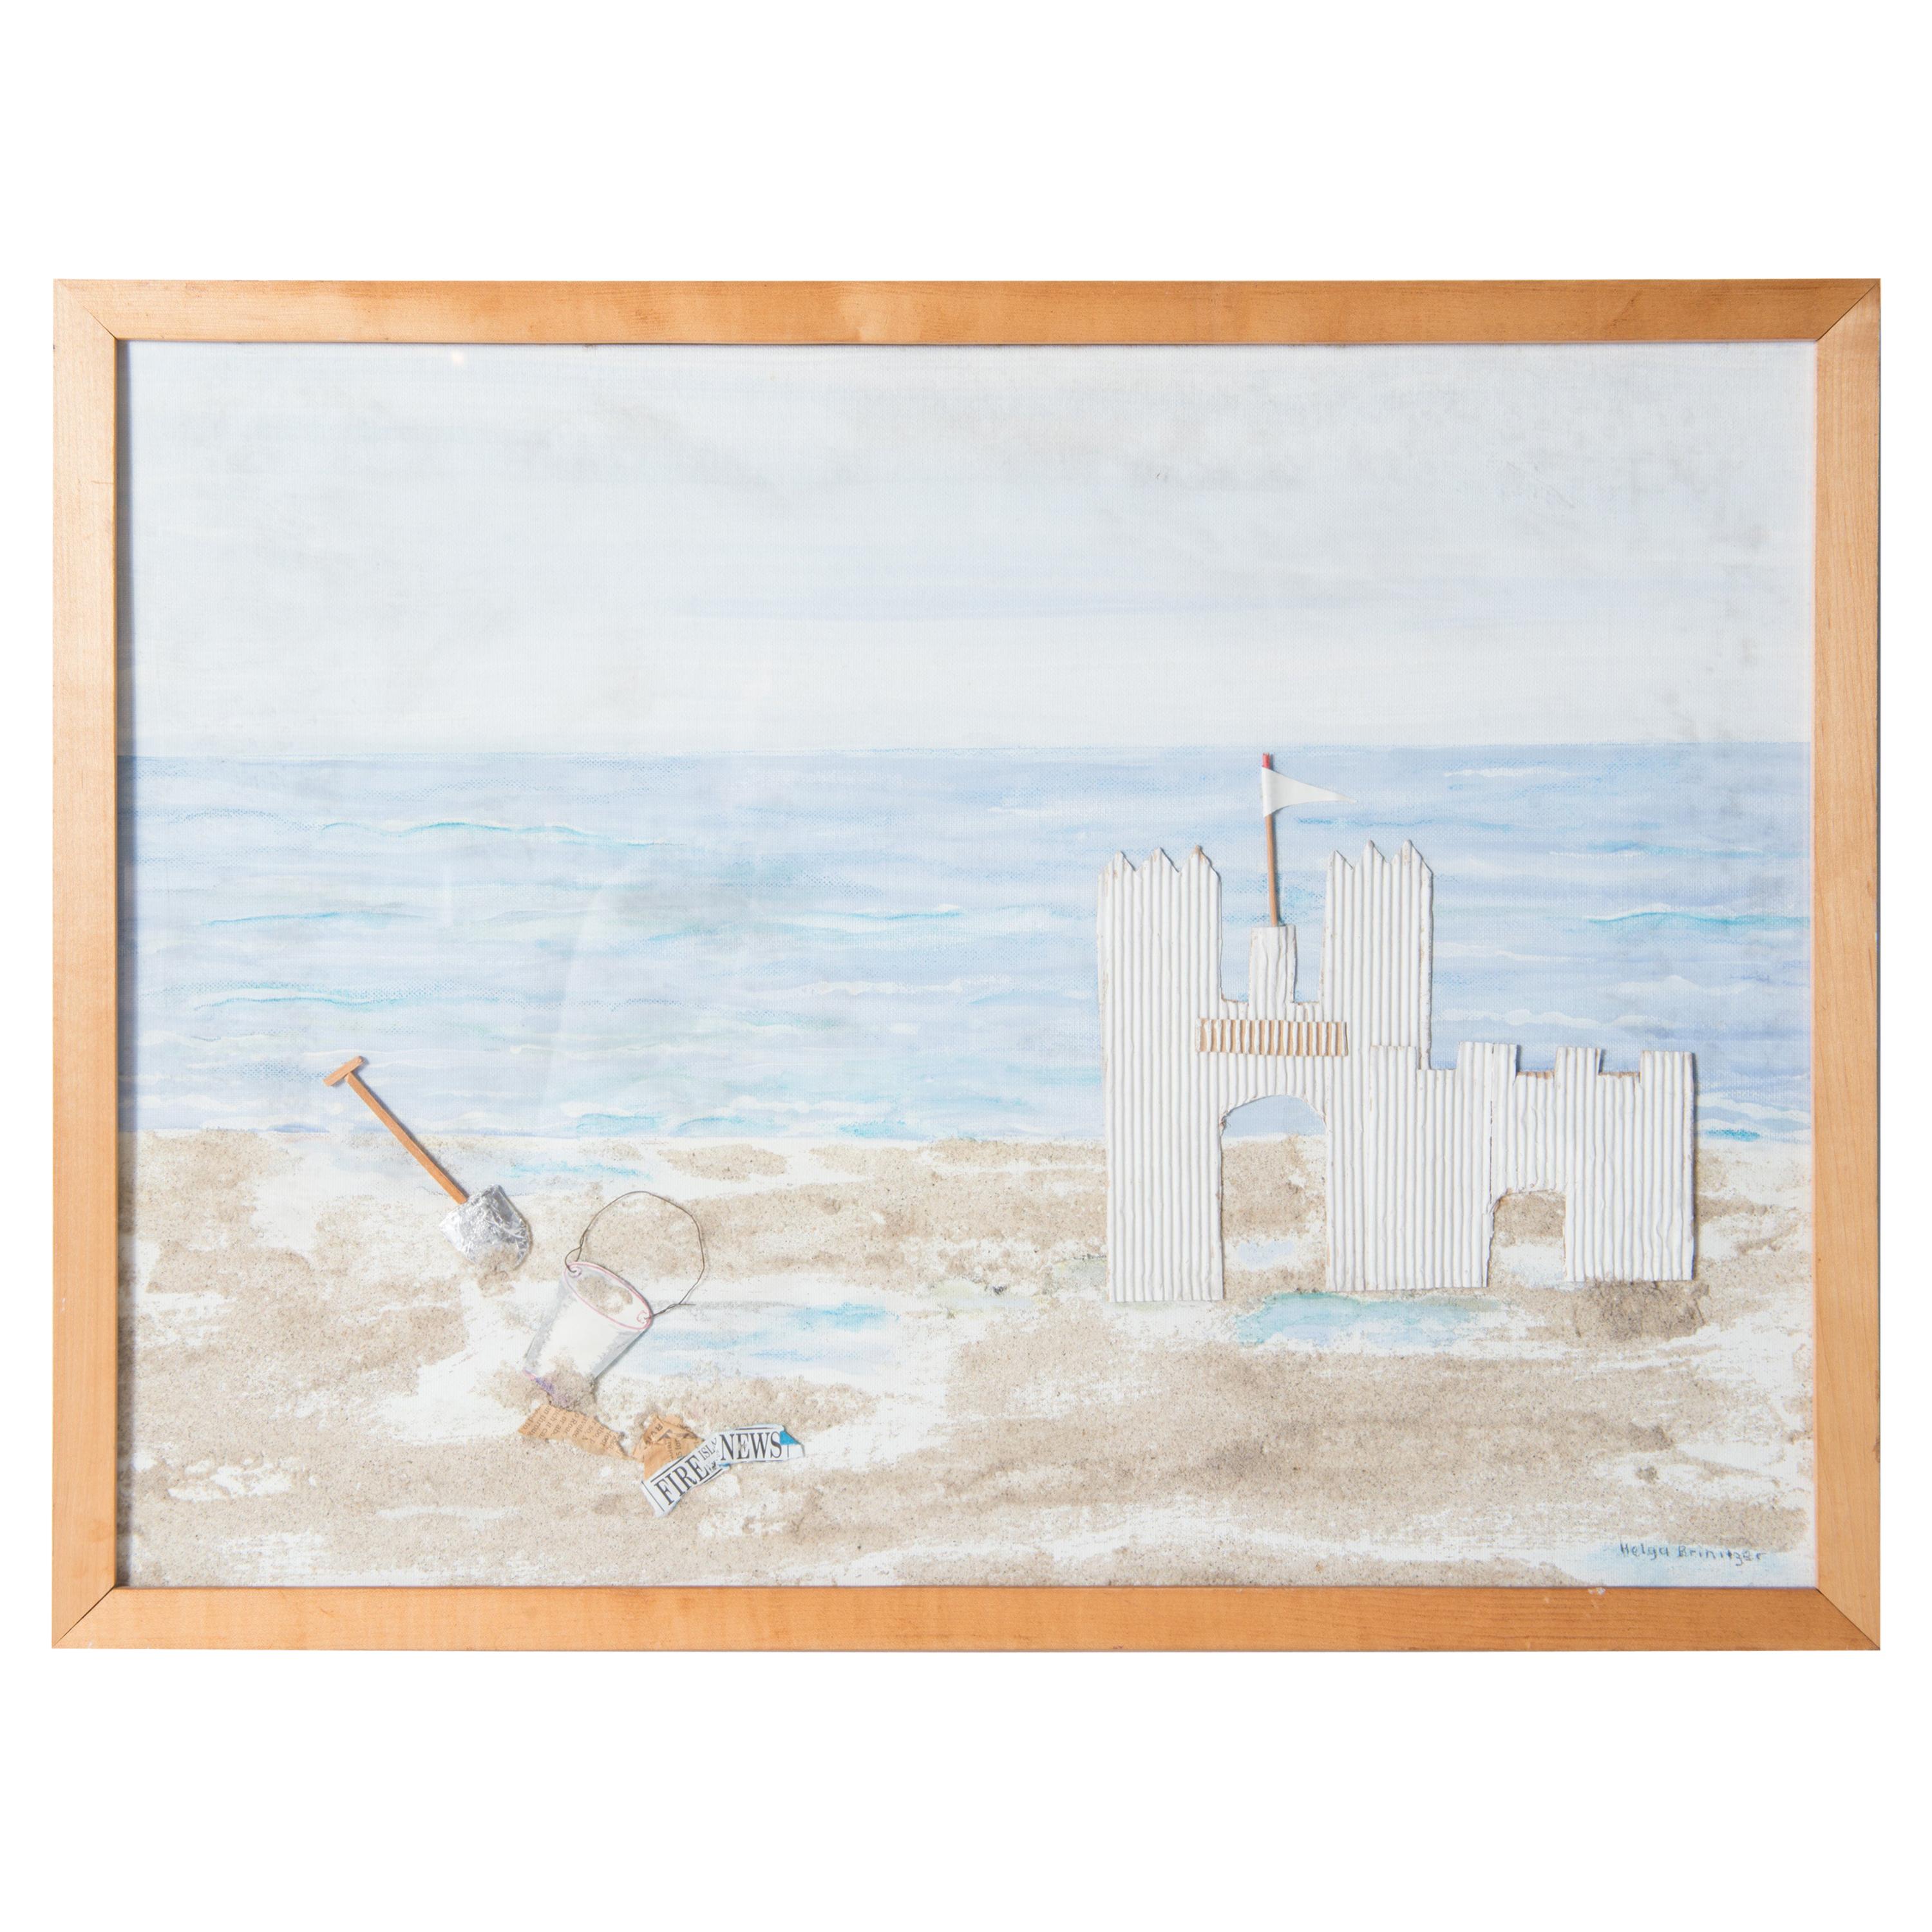 Fire Island, Sand Castle on the Beach Collage, Signed